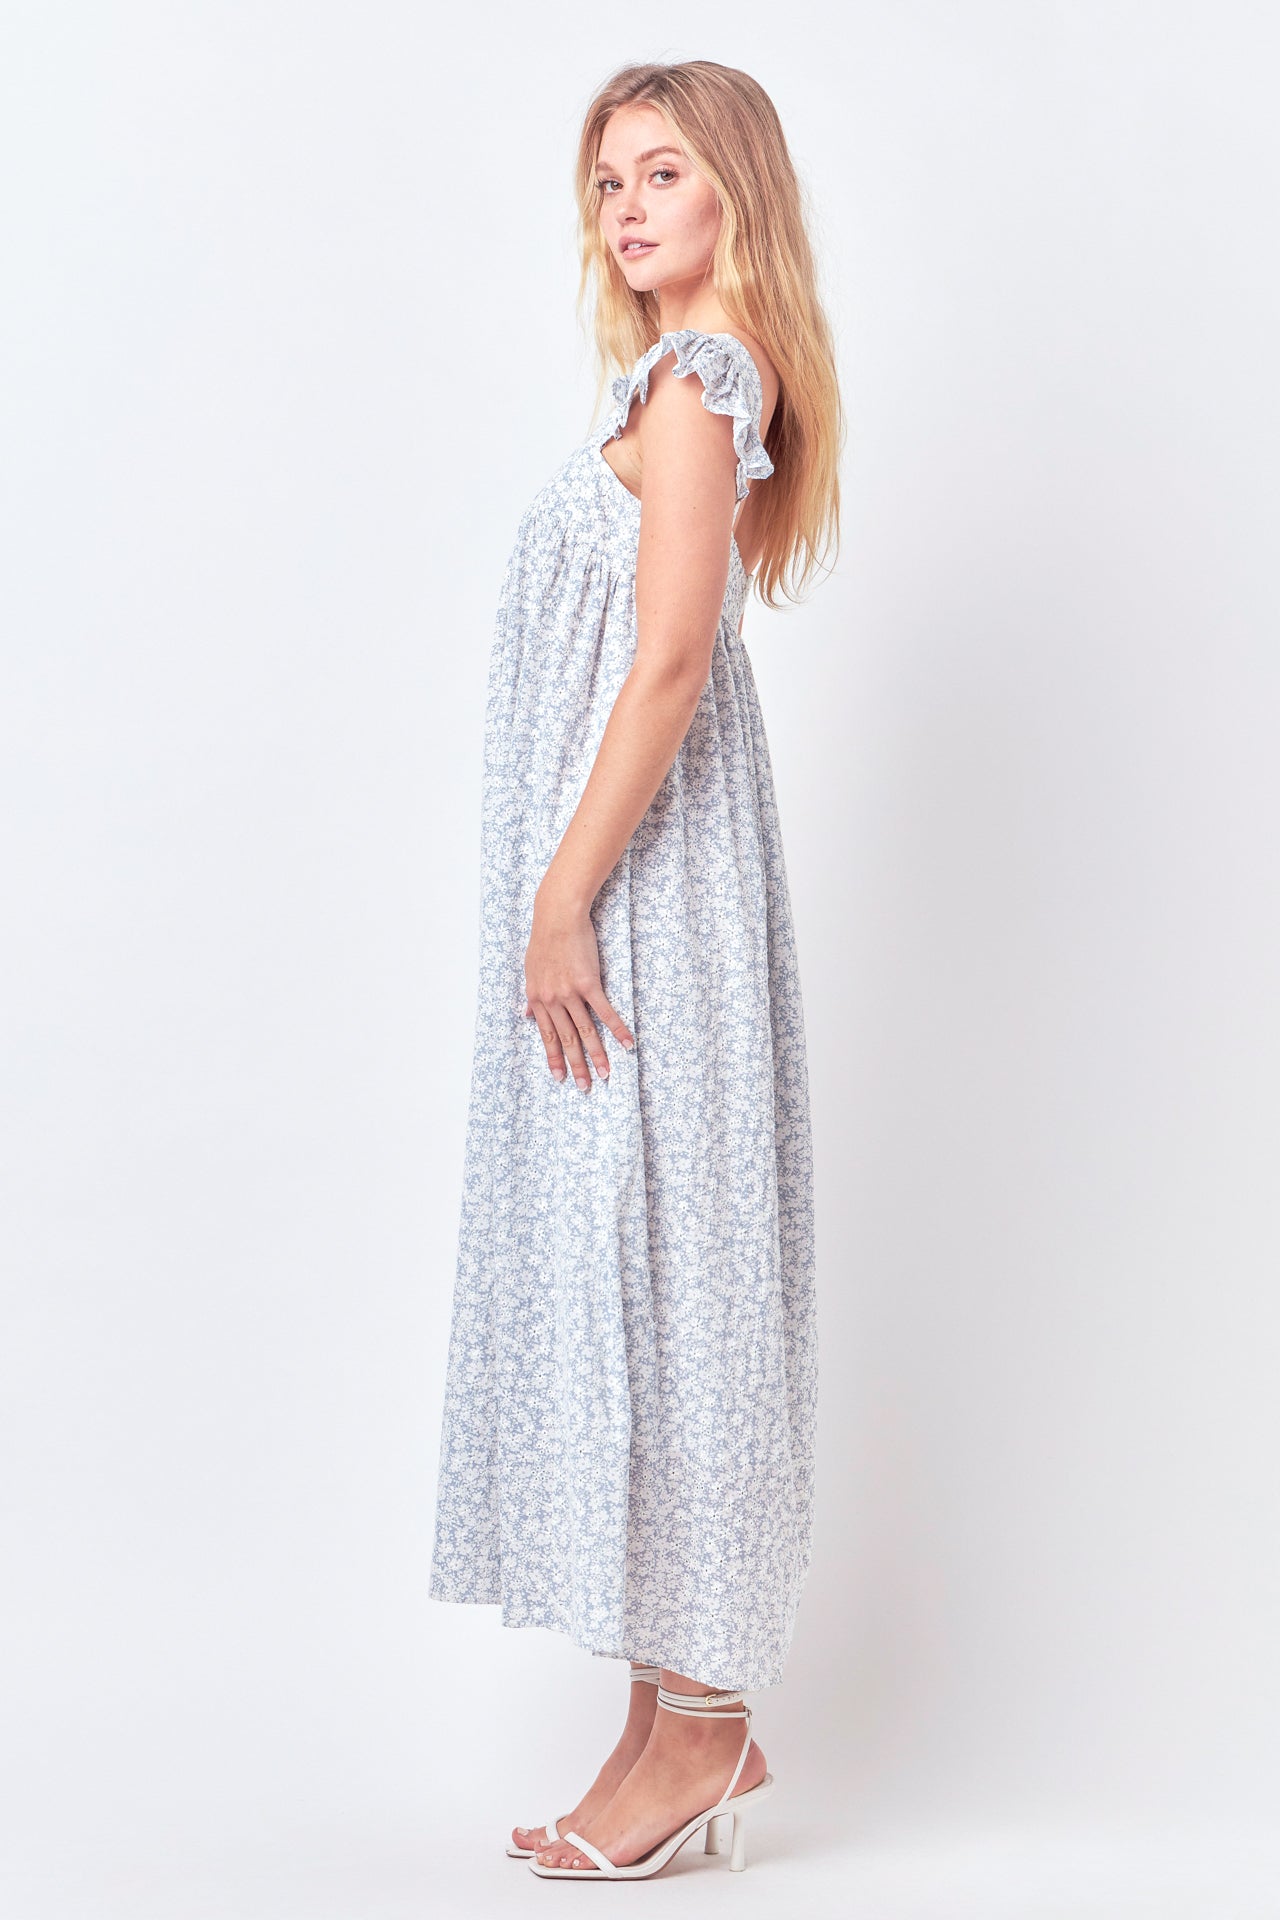 FREE THE ROSES - Floral Print with Embroidery Maxi Dress - DRESSES available at Objectrare